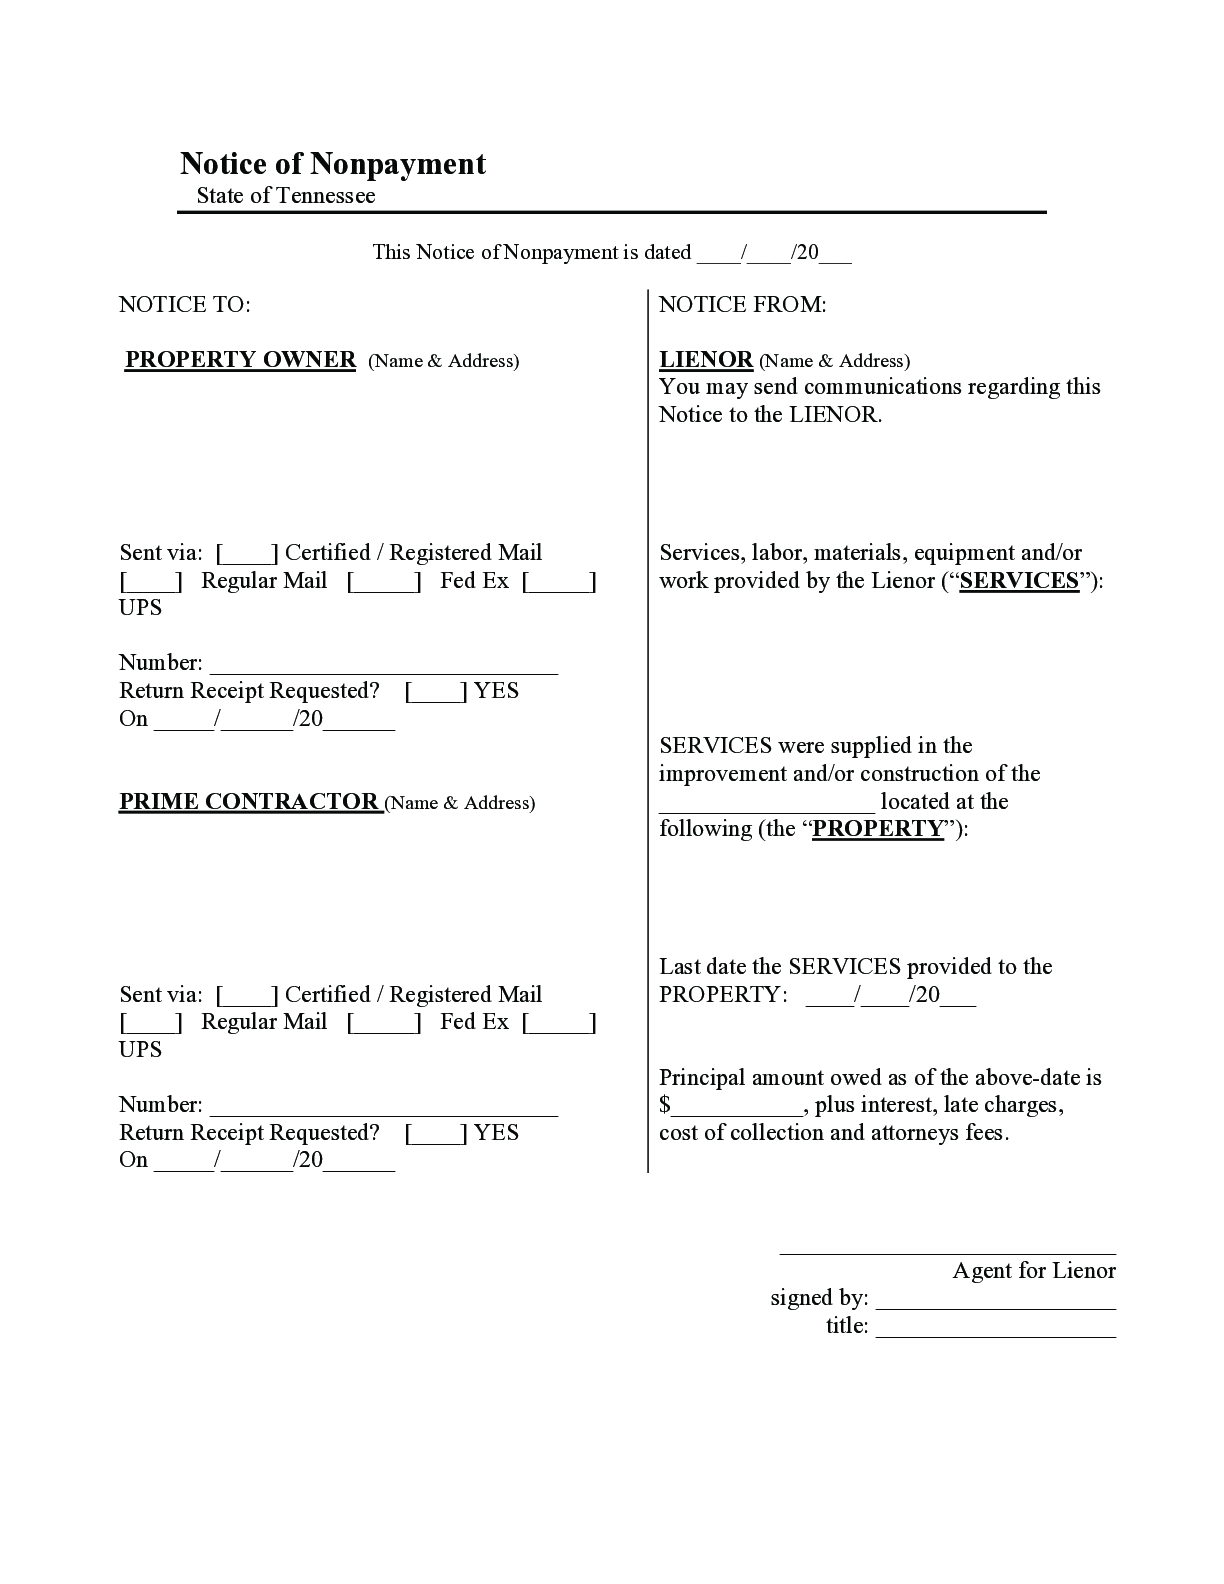 Tennessee Notice of Non-Payment Form